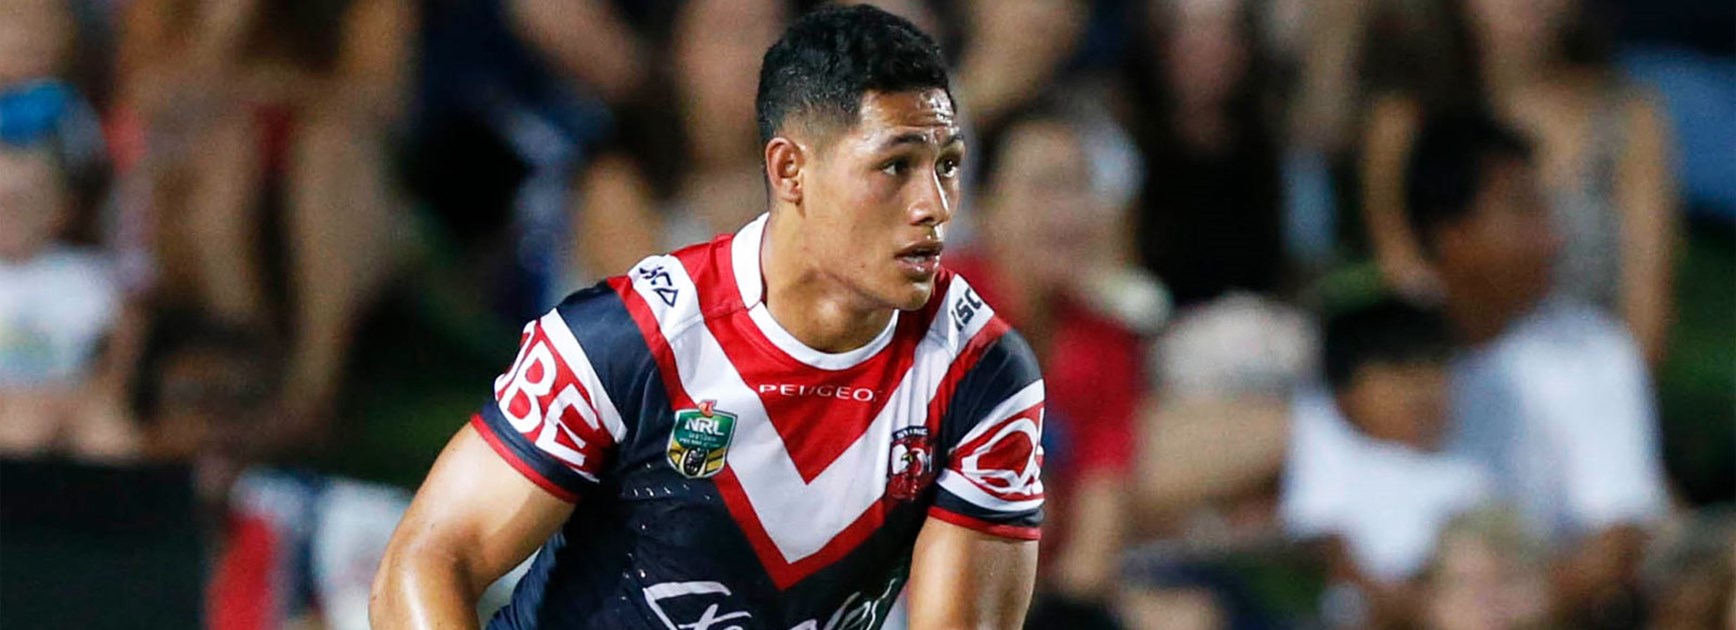 Roger Tuivasa-Sheck was inspired as a youngster by local hero Frank-Paul Nuuausala.